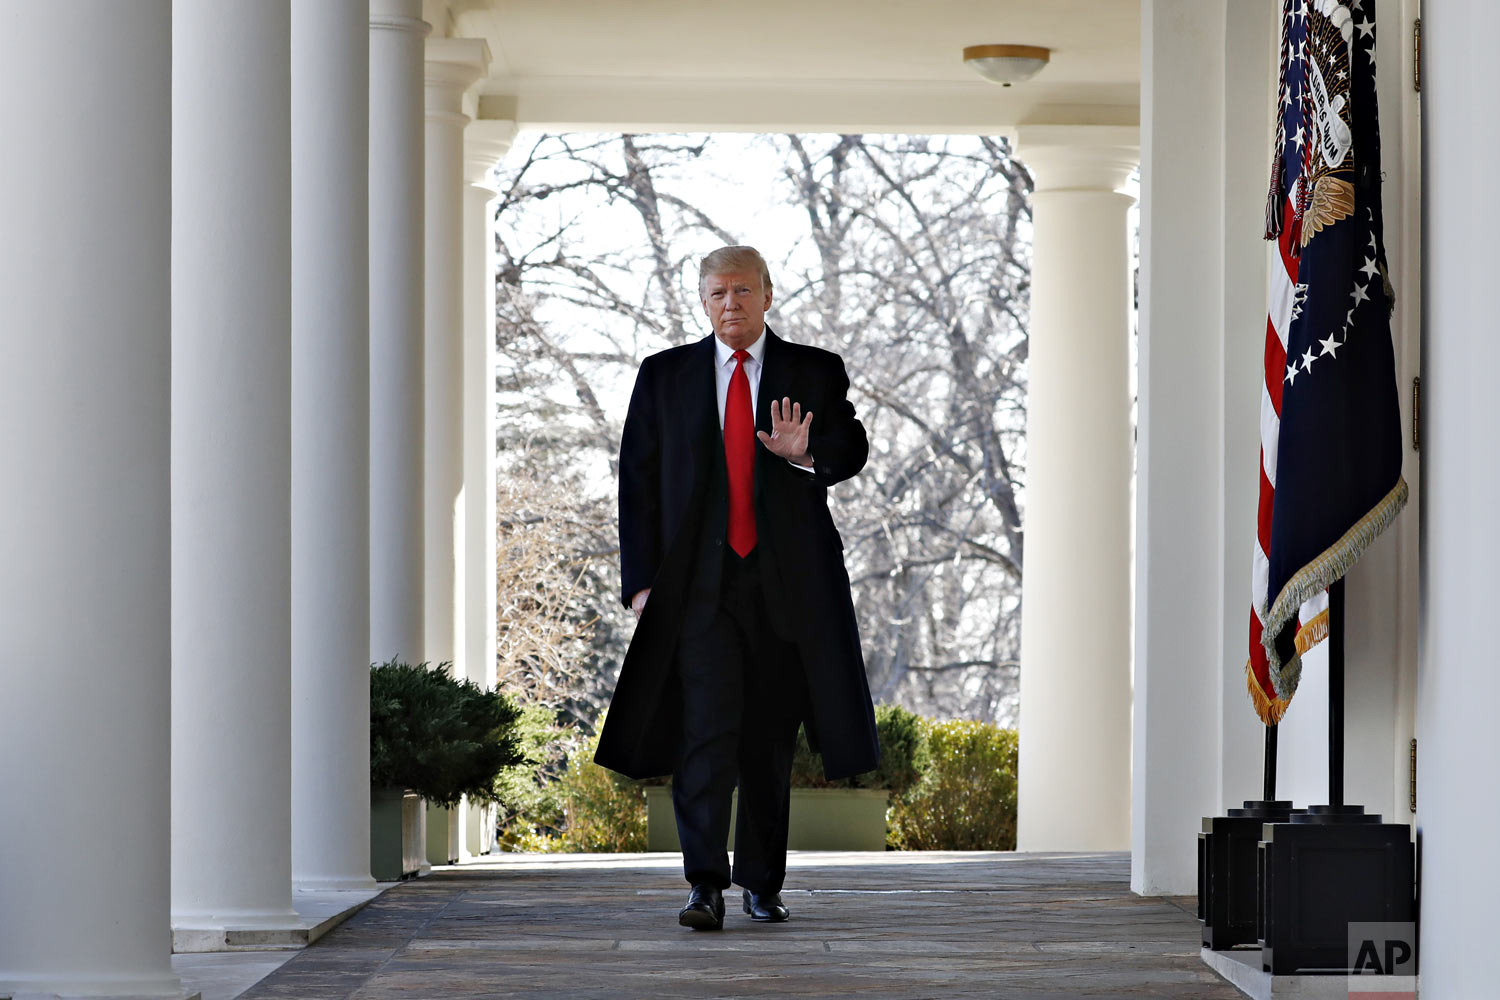  President Donald Trump waves as he walks through the Colonnade from the Oval Office of the White House on arrival to announce a deal to temporarily reopen the government, Friday, Jan. 25, 2019, from the Rose Garden of the White House in Washington. 